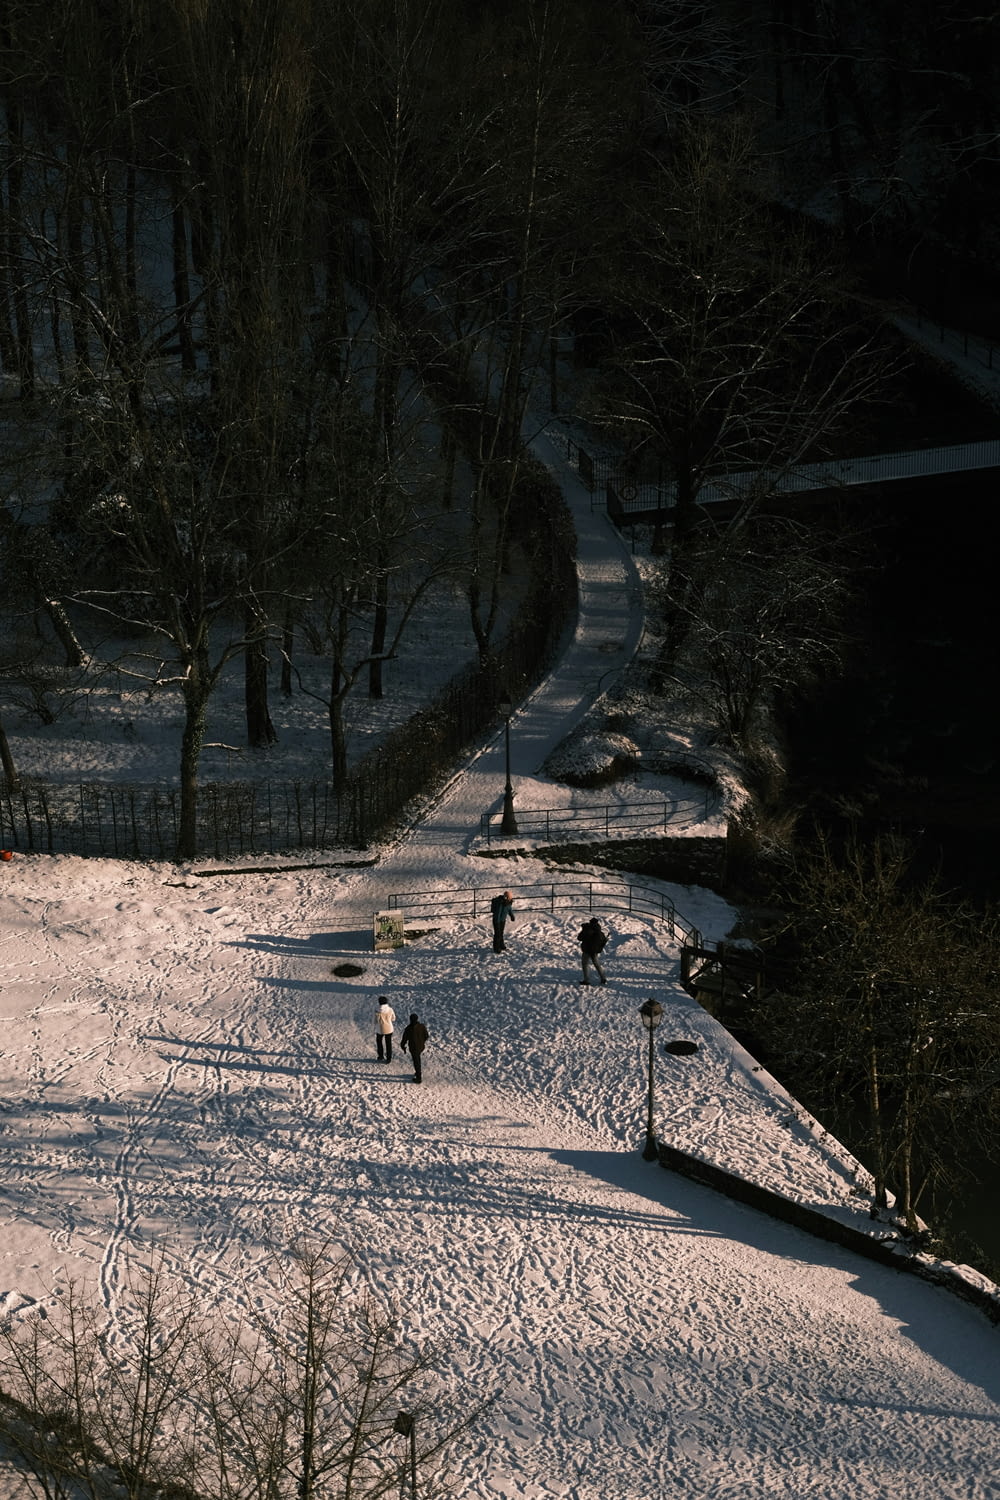 a group of people skiing down a snow covered slope